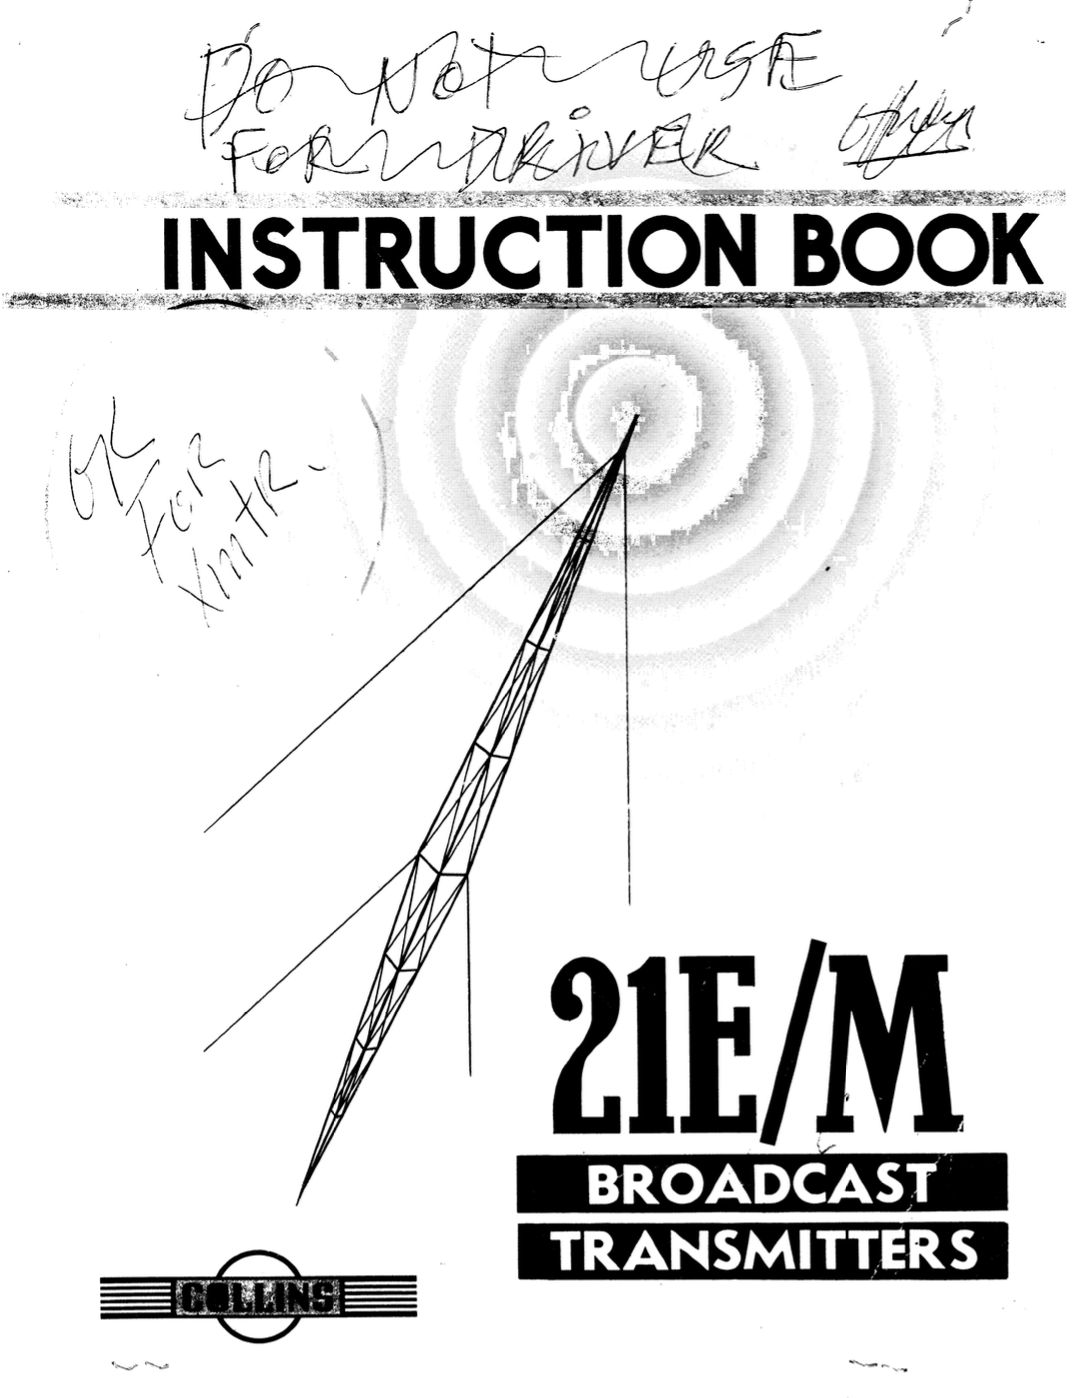 Collins 21E AM Transmitter - Instruction and Service Manual